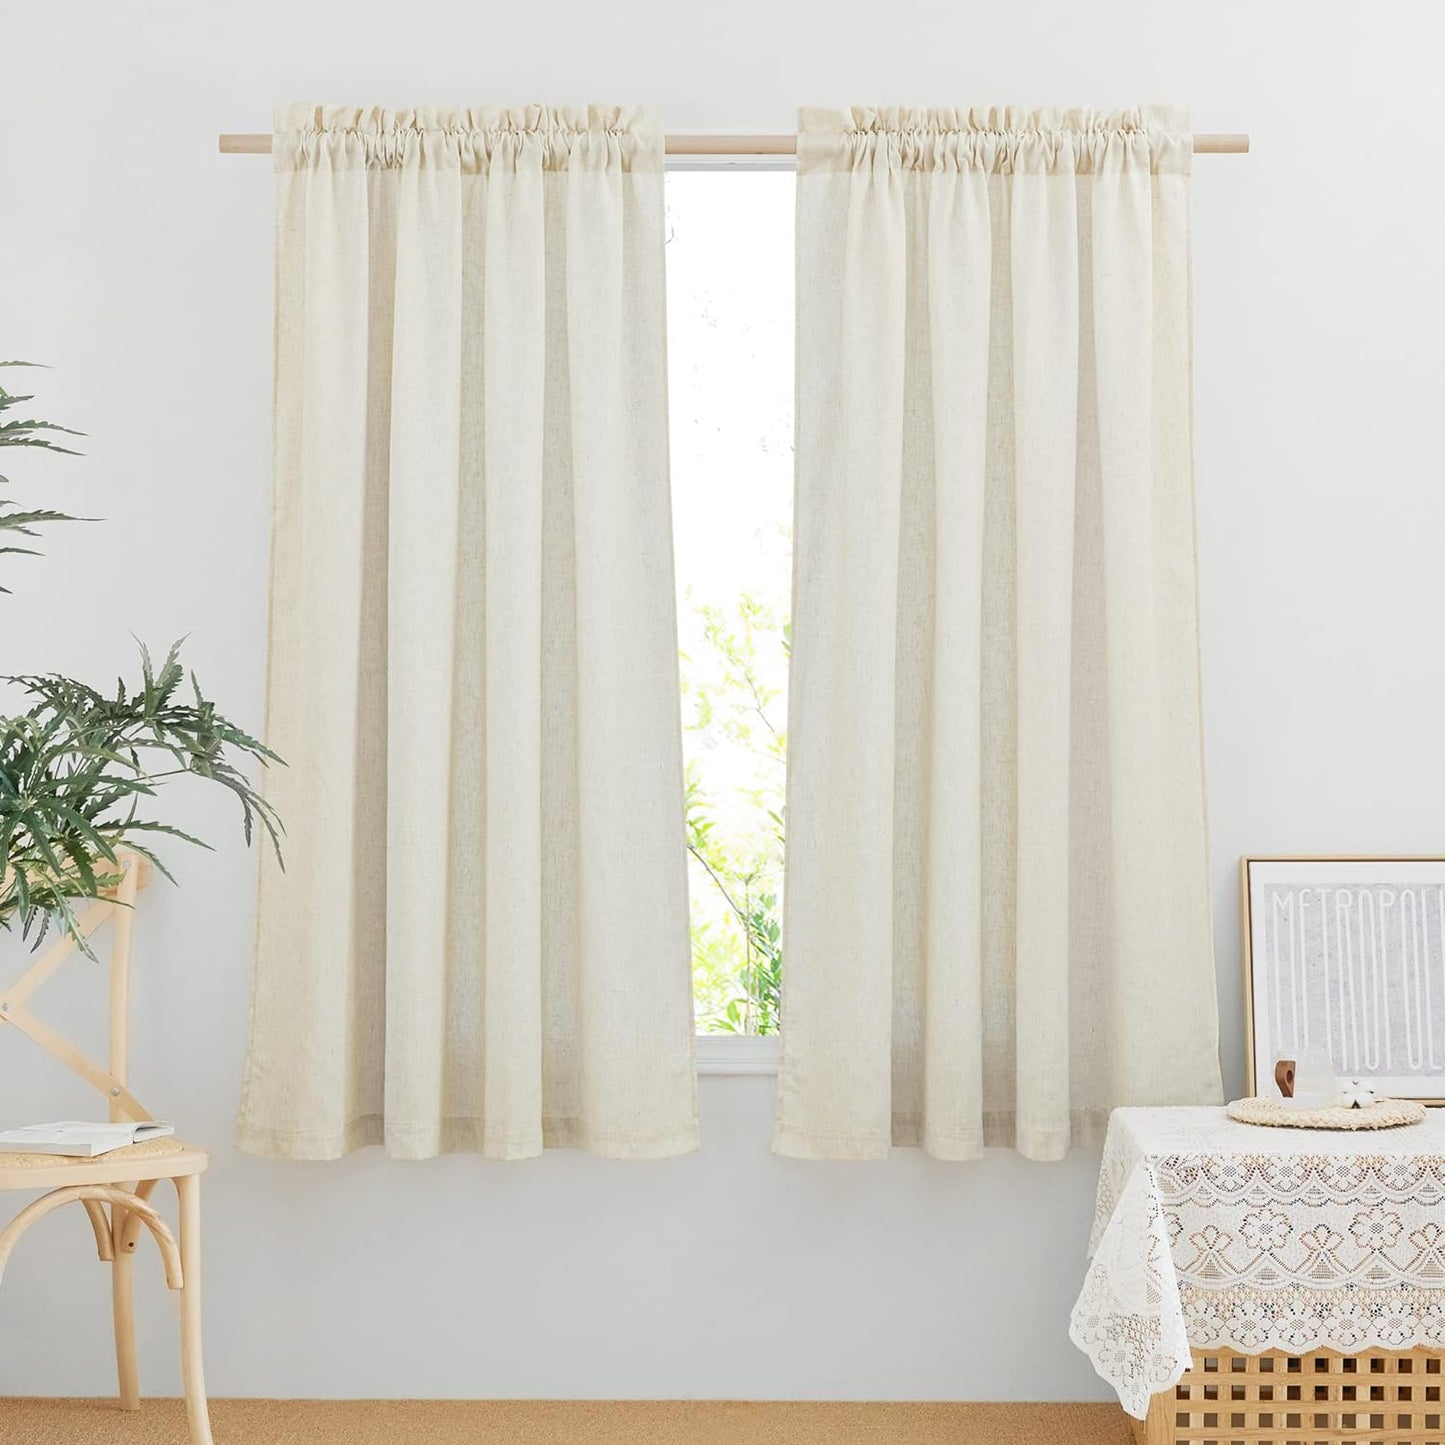 NICETOWN Natural Linen Curtains & Drapes for Windows 84 Inch Long, Rod Pocket Thick Flax Semi Sheer Privacy Assured with Light Filtering for Bedroom/Living Room, W55 X L84, 2 Pieces  NICETOWN Off White W55 X L63 